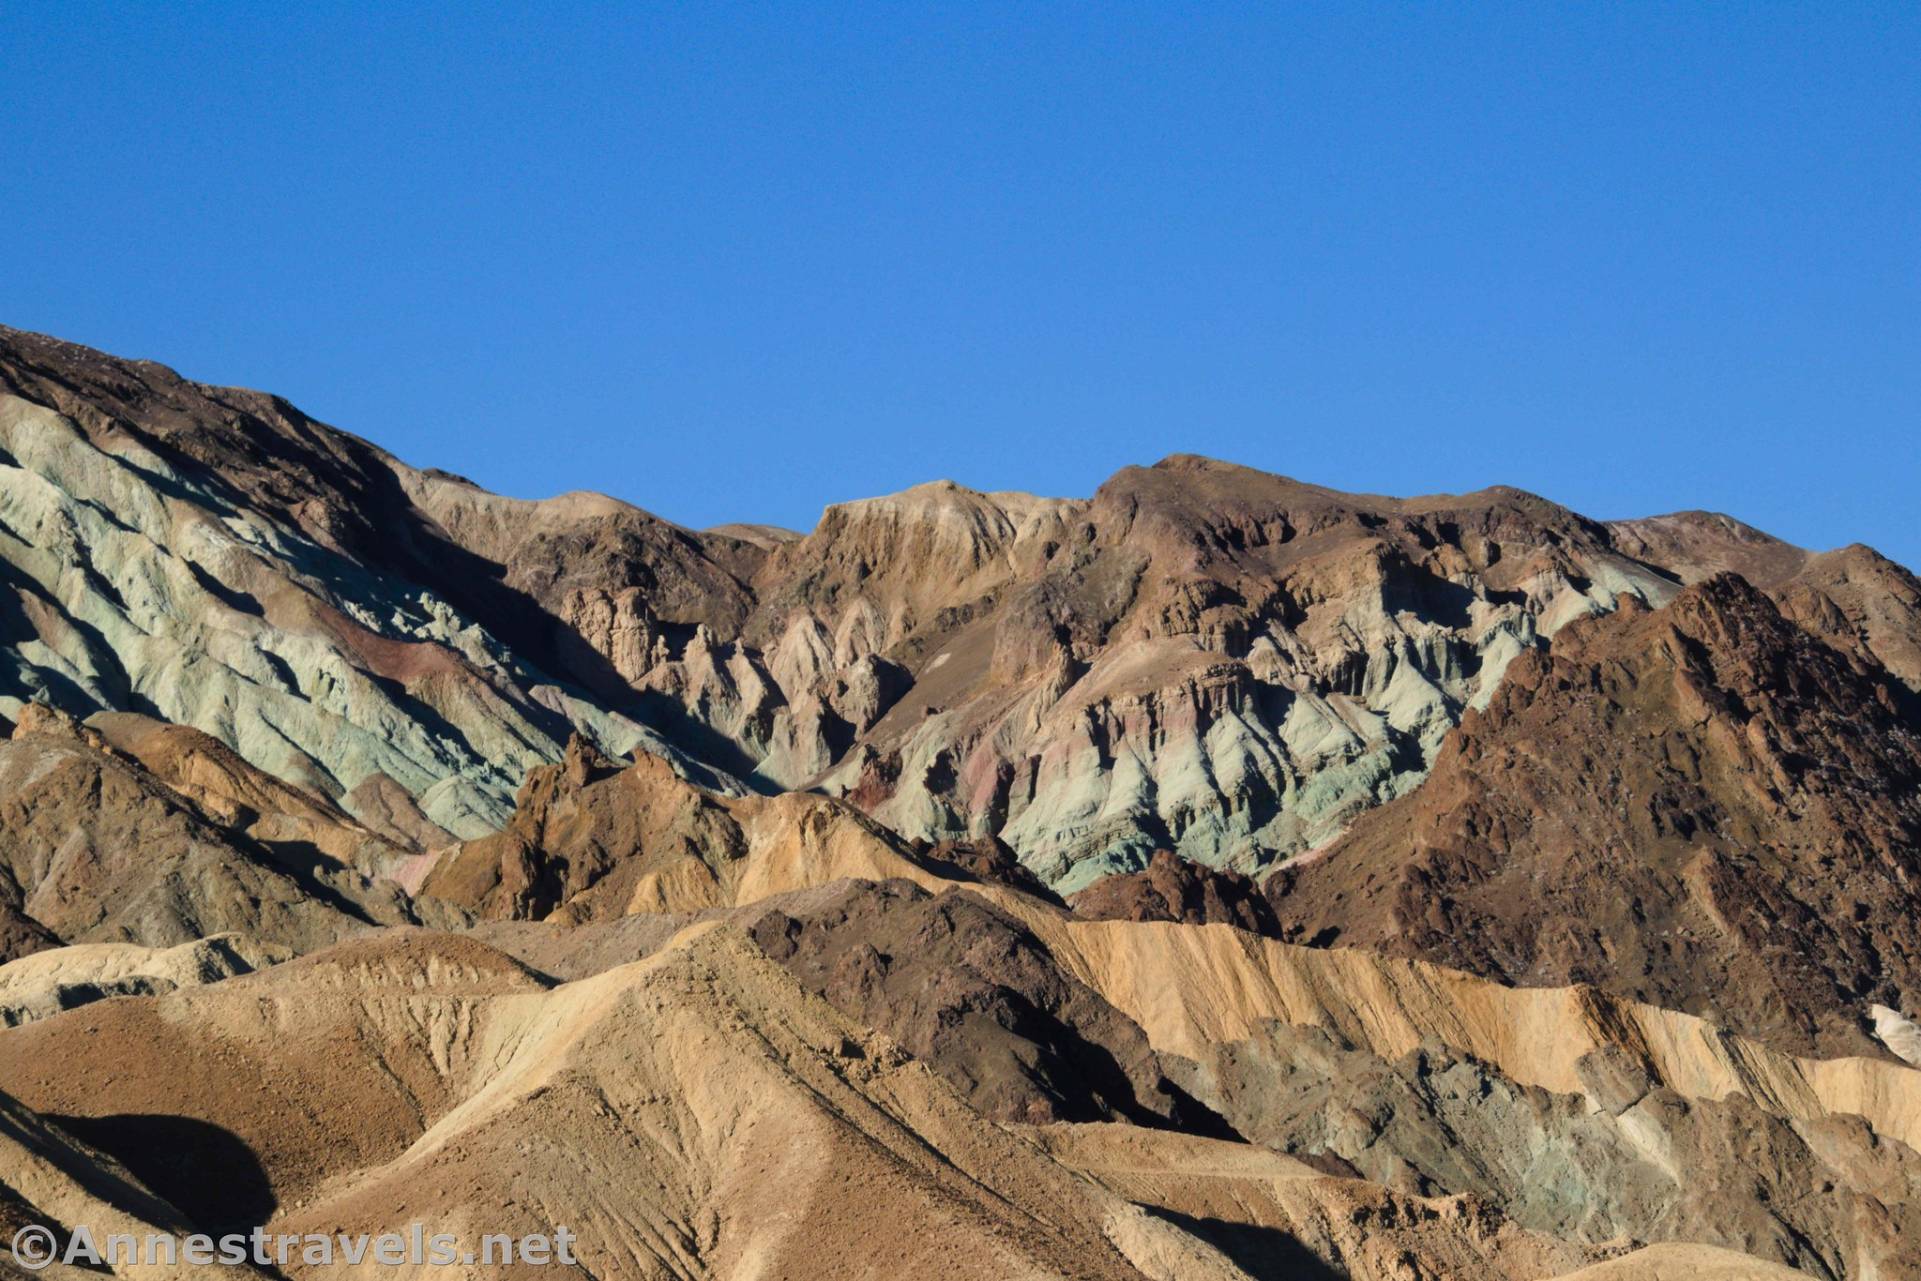 Colorful badlands near the 20 Mule Team Scenic Drive, Death Valley National Park, California